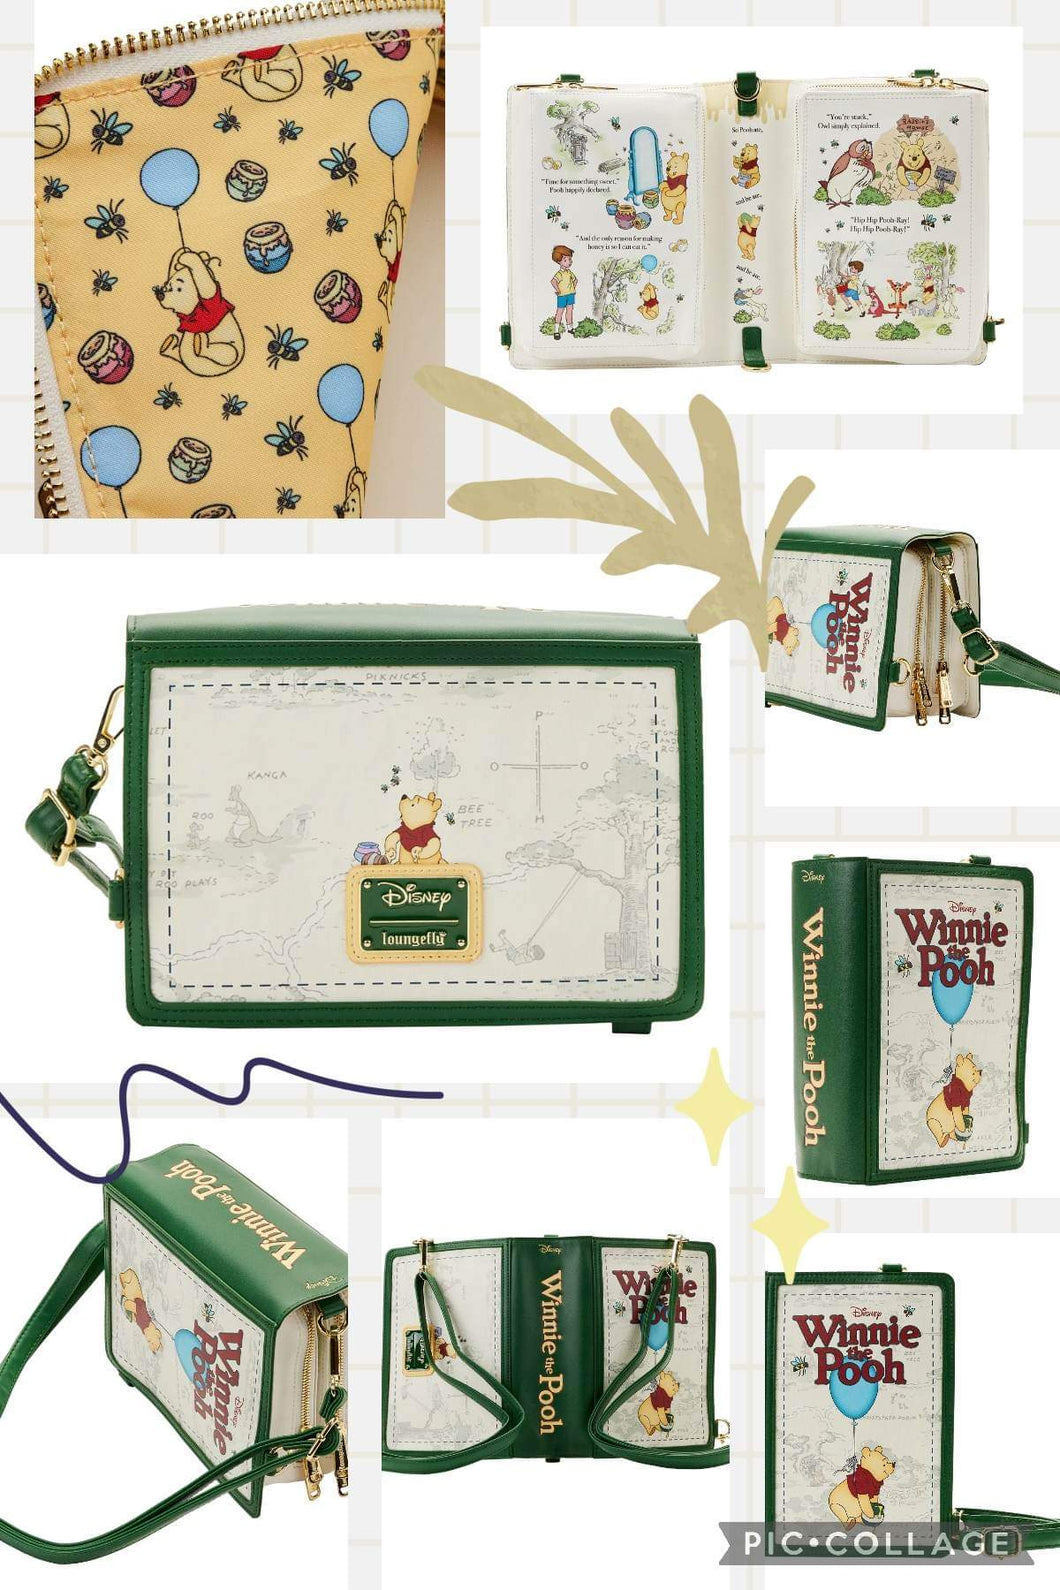 LoungeFly Winnie the Pooh Classic Book Cover Convertible Crossbody Bag